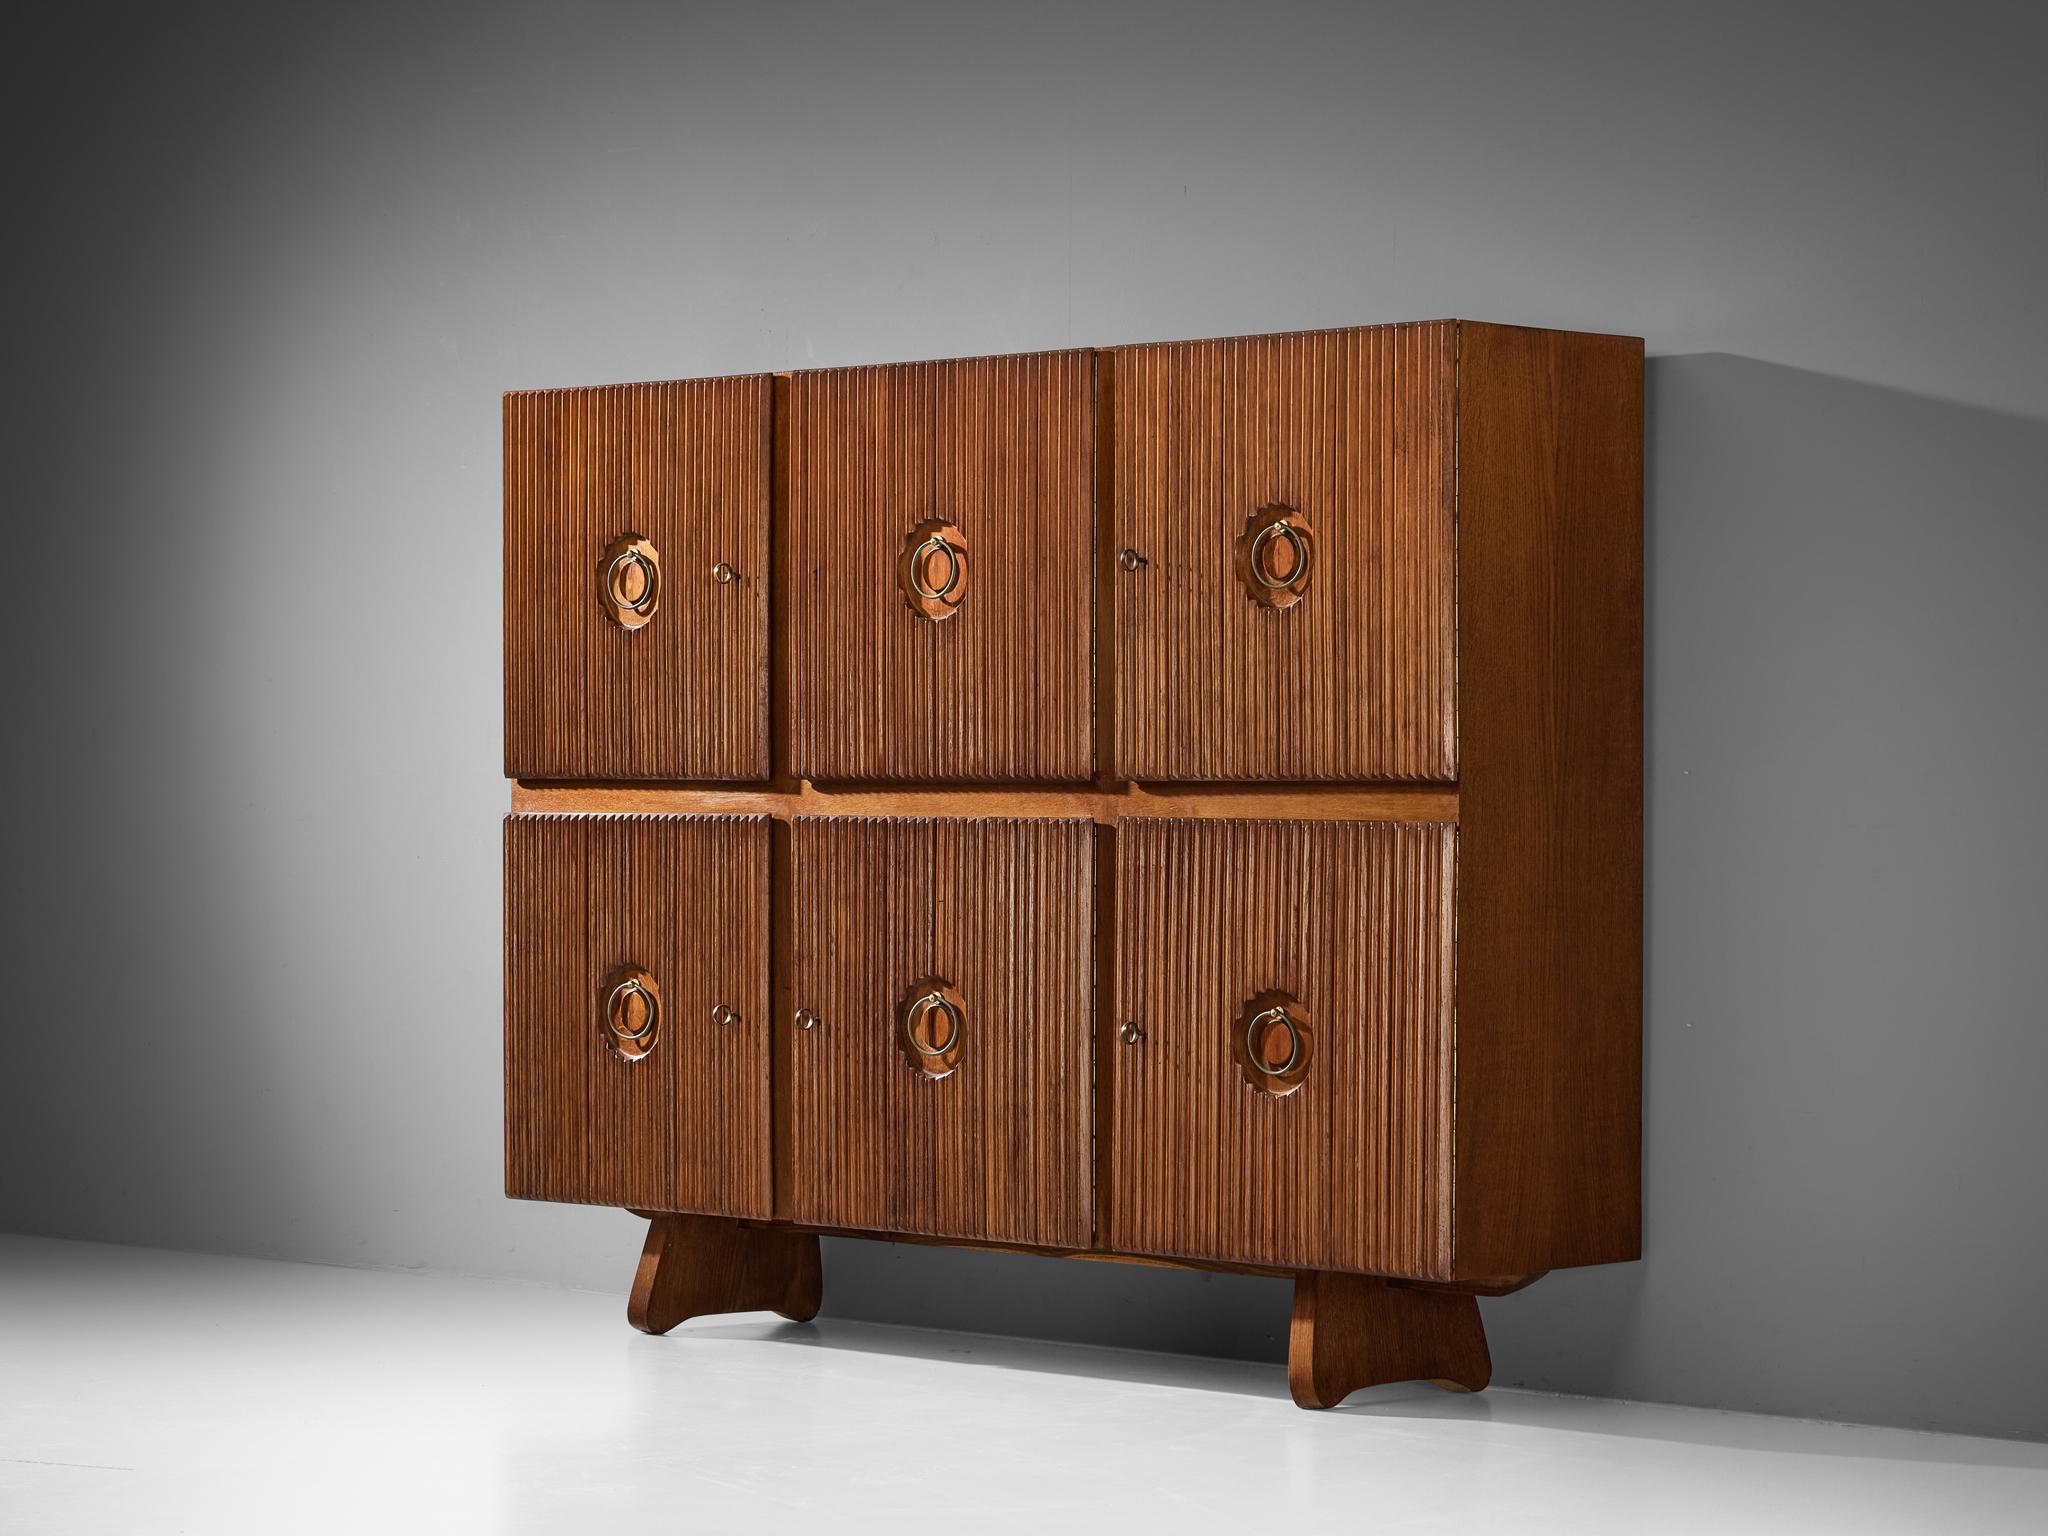 Paolo Buffa for Esposizione Permanente mobili Cantù, wall cabinet, chestnut, pine, brass, Italy, 1940s

Crafted by the visionary Italian designer and architect Paolo Buffa (1903-1970), this six door wall cabinet exudes a refined decorative allure.